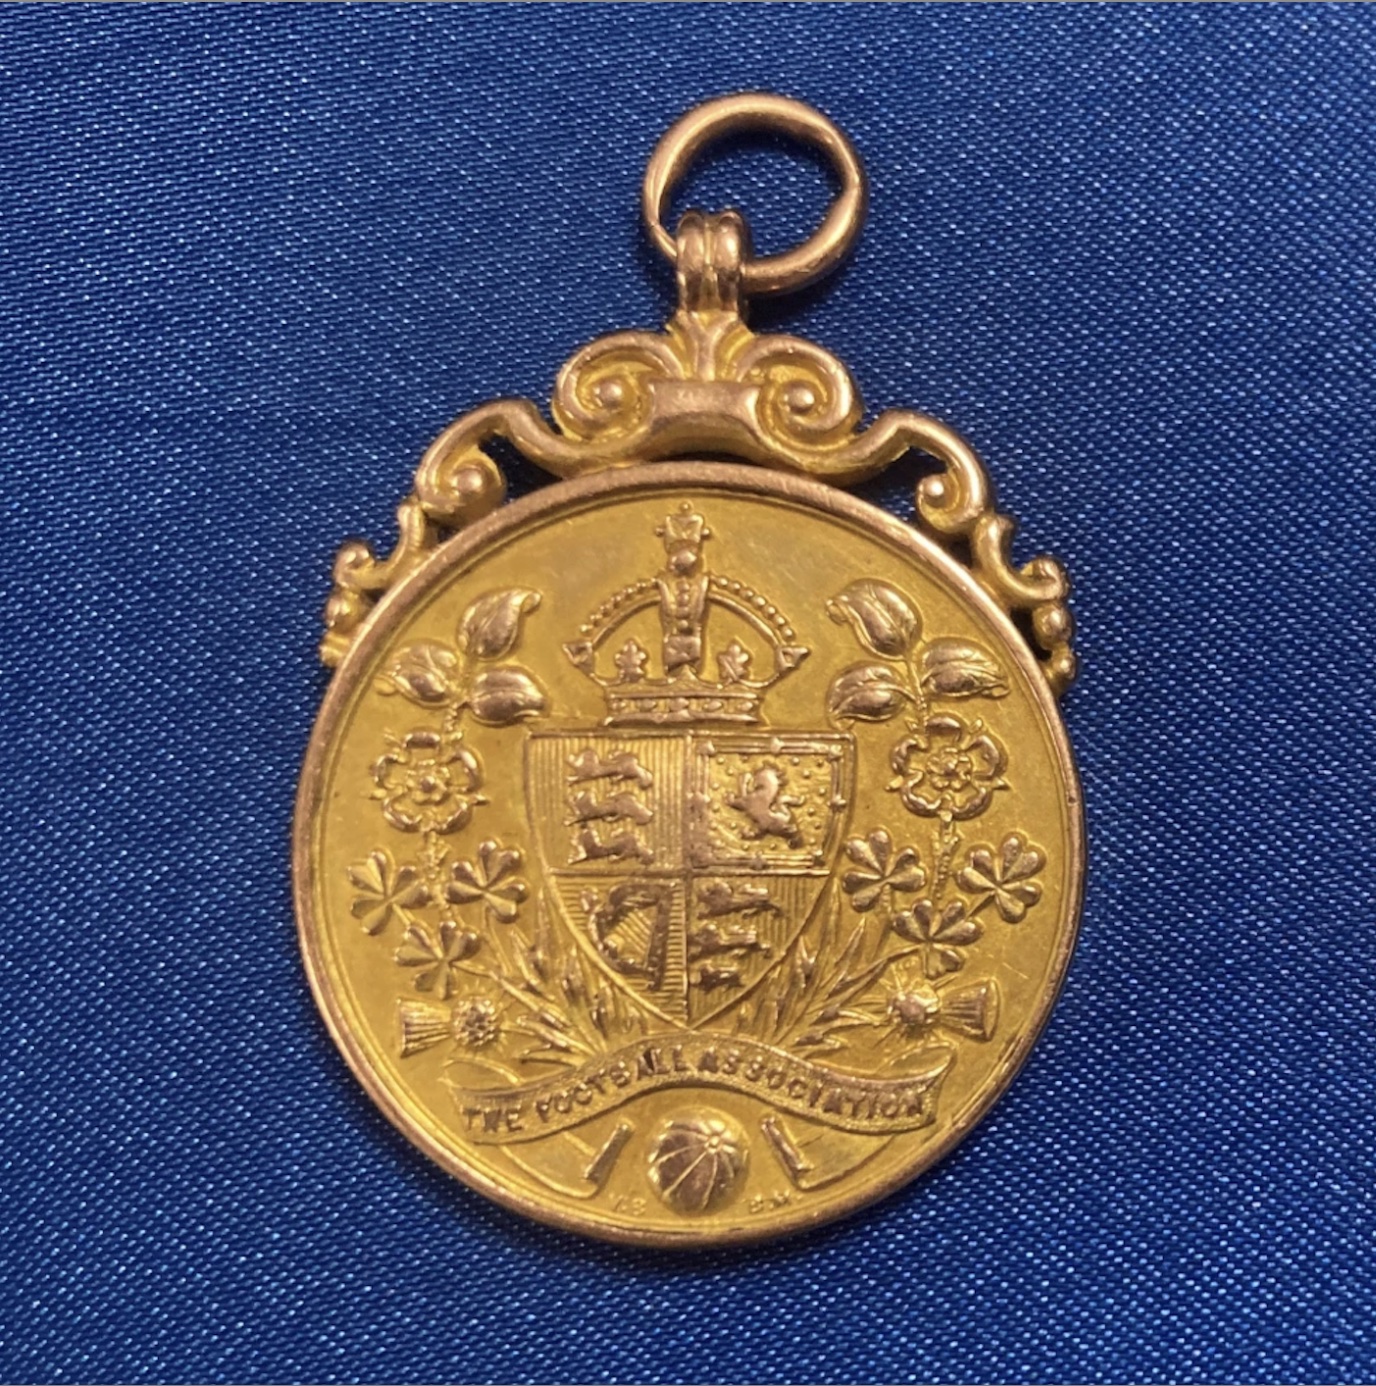 Medal from Chelsea’s first cup final to go on display